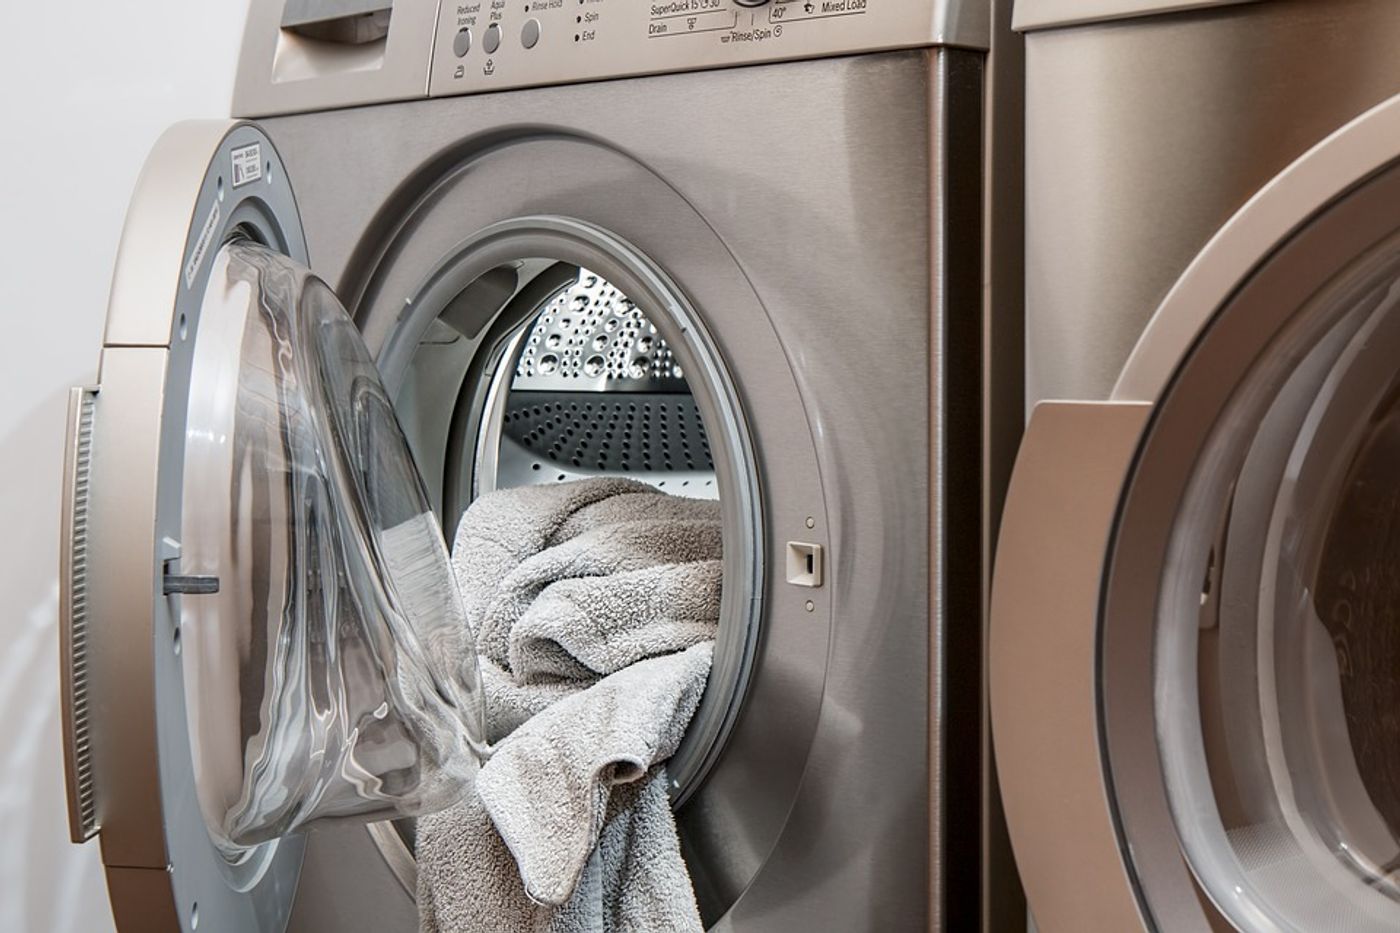 Researchers say the delicate cycle releases the most microfiber plastics. Photo: Pixabay